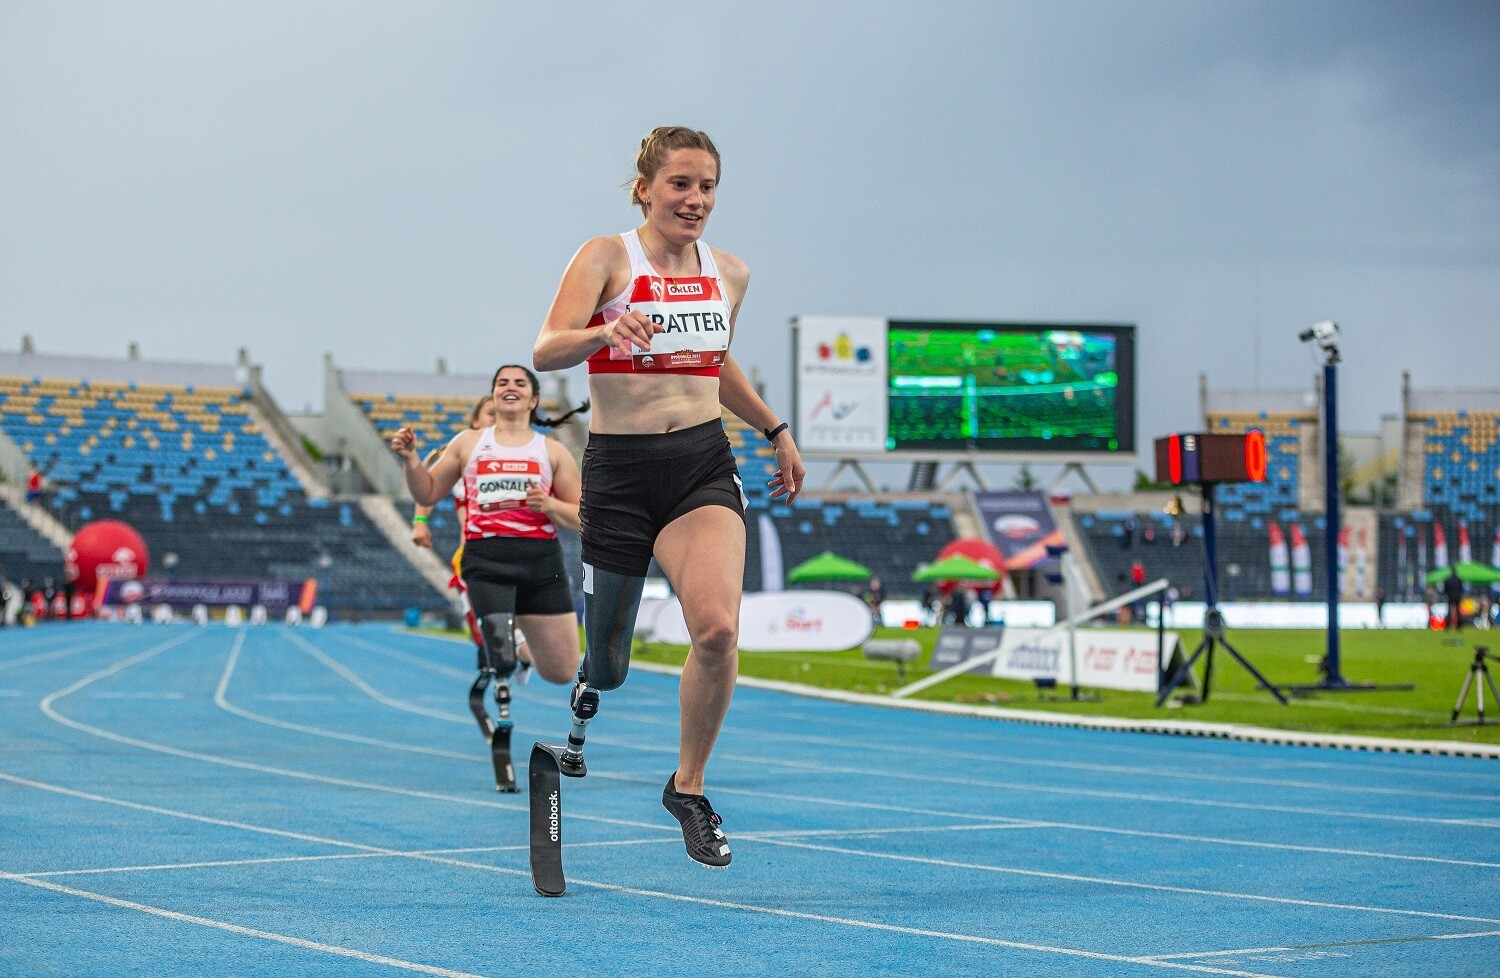 Young track and field athlete Elena Kratter is running on a track with a prosthetic leg.